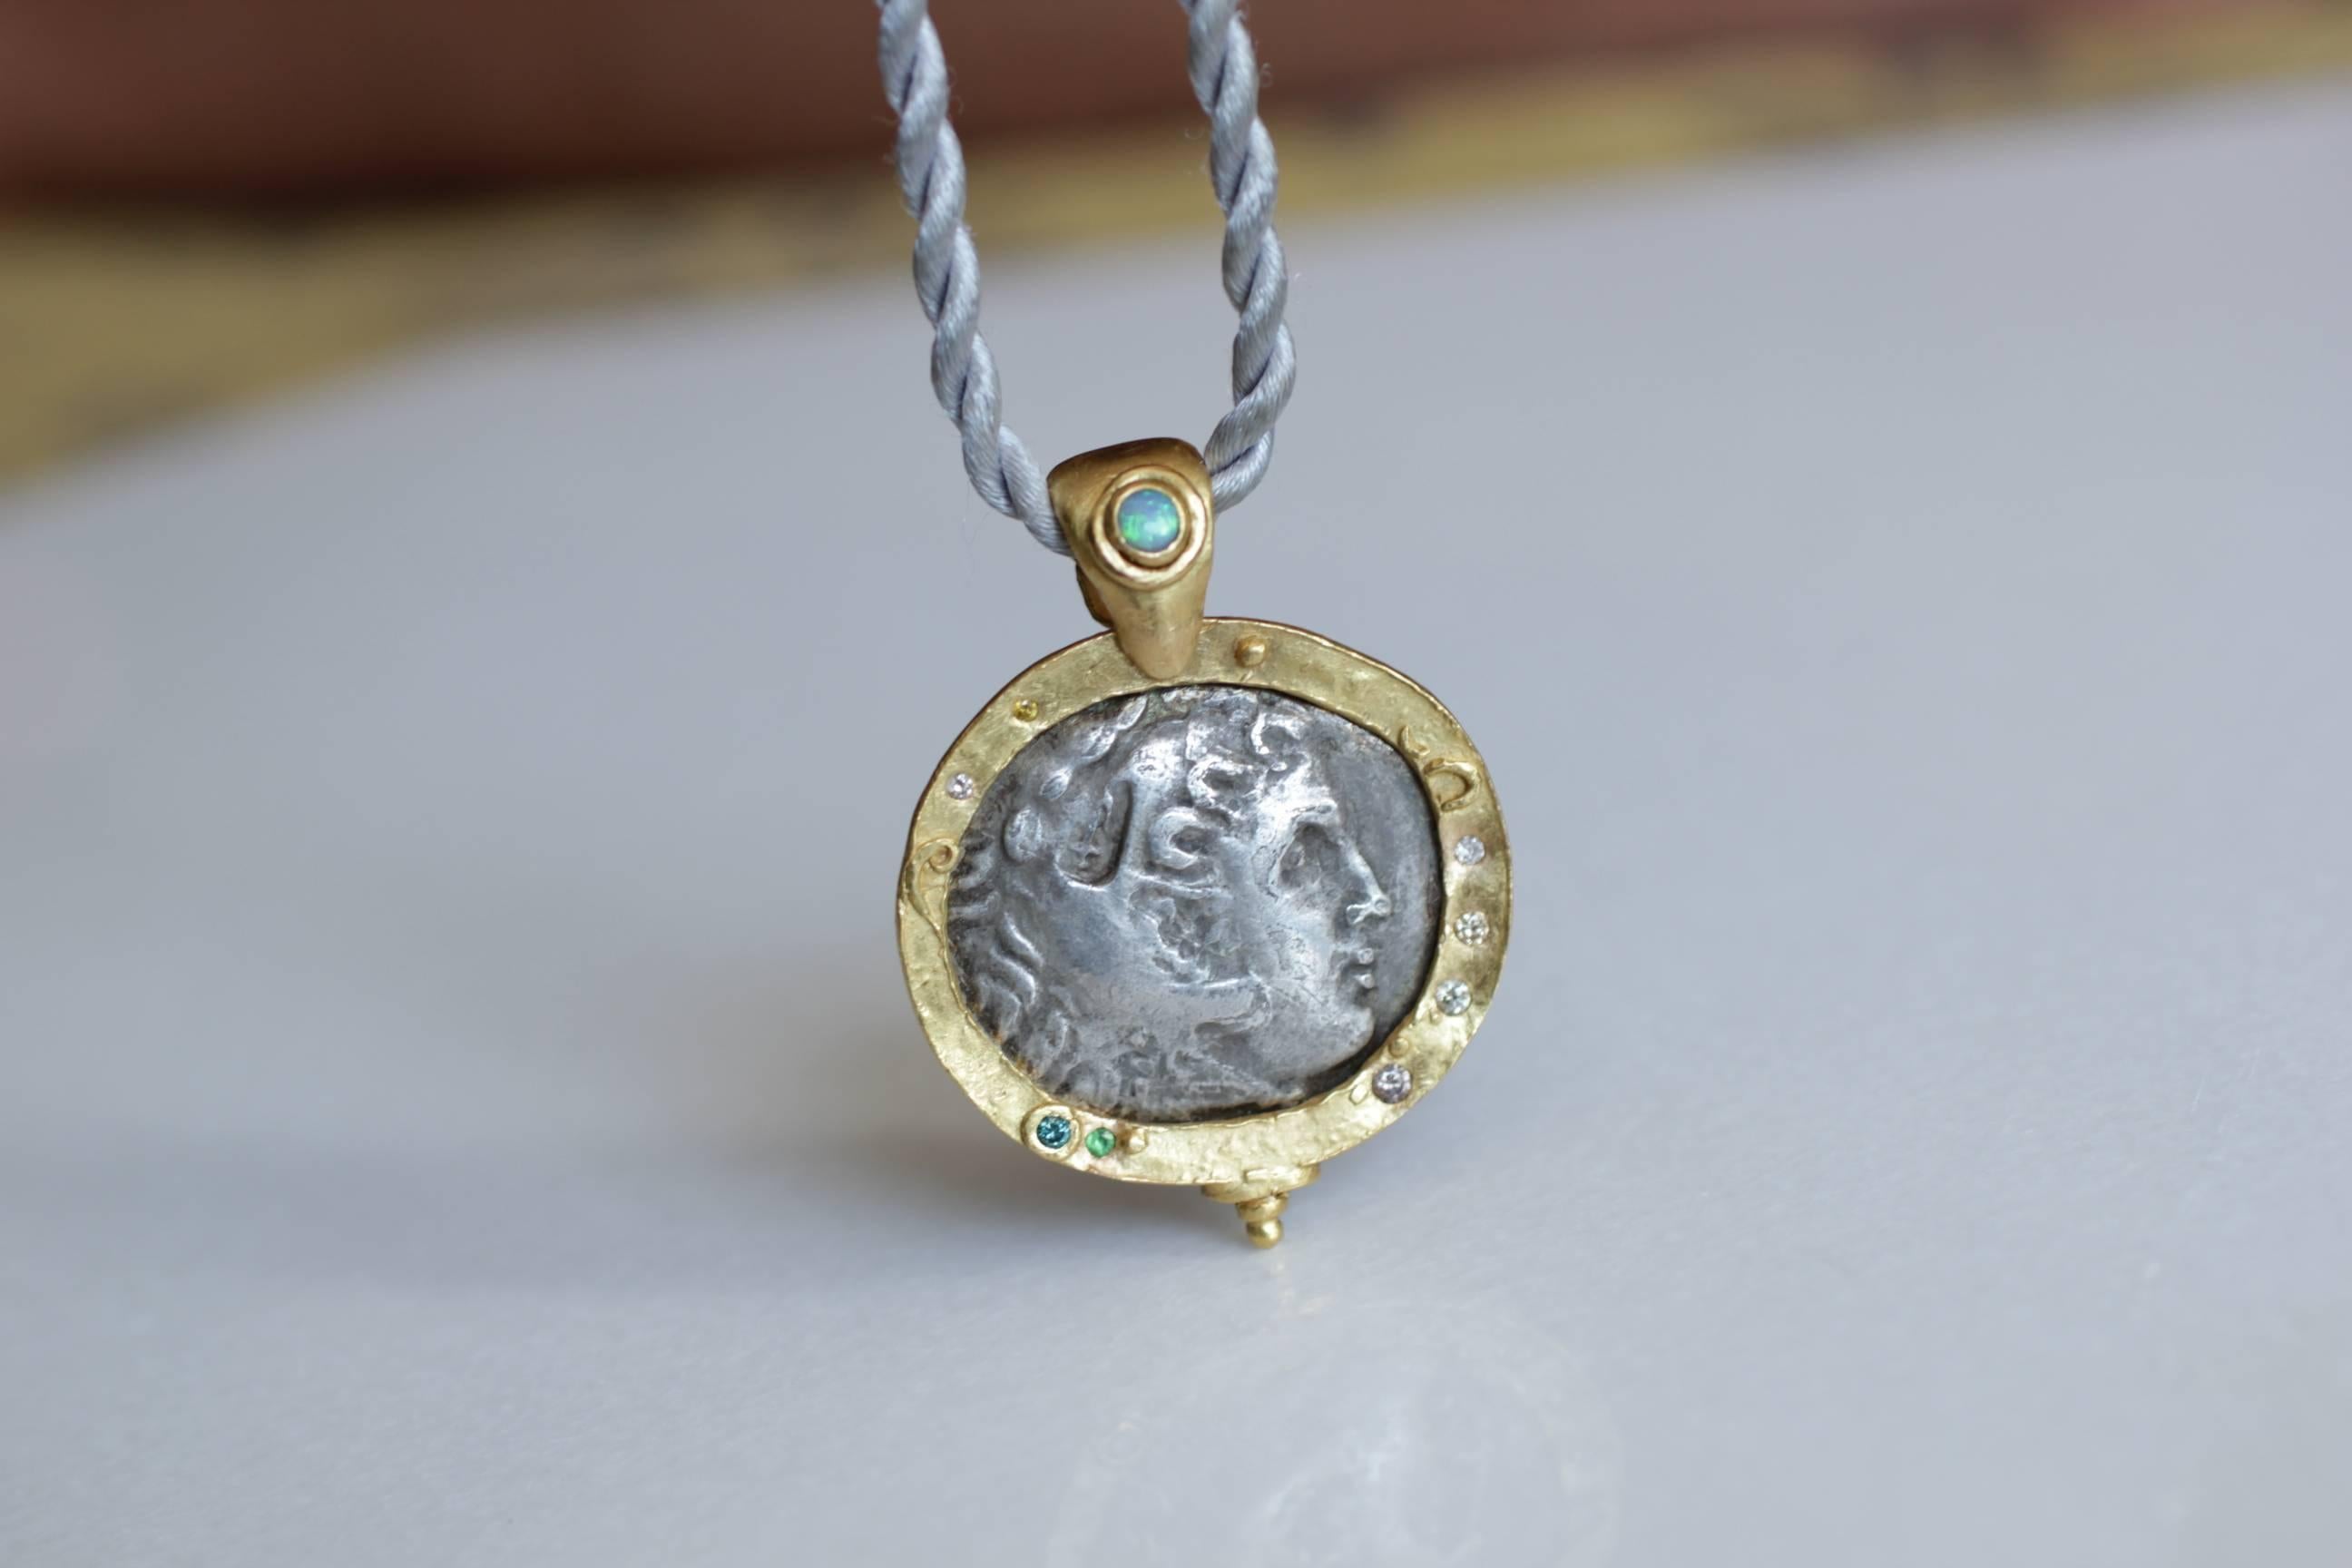 Antique silver Macedonian Coin Medallion Pendant Necklace. Antique 3rd Cent BC Greek coin, set in 21k gold bezel, embellished with small diamonds and garnet accents. The Bail is highlighted with Lightning Ridge Opal, also set in a bezel.

The